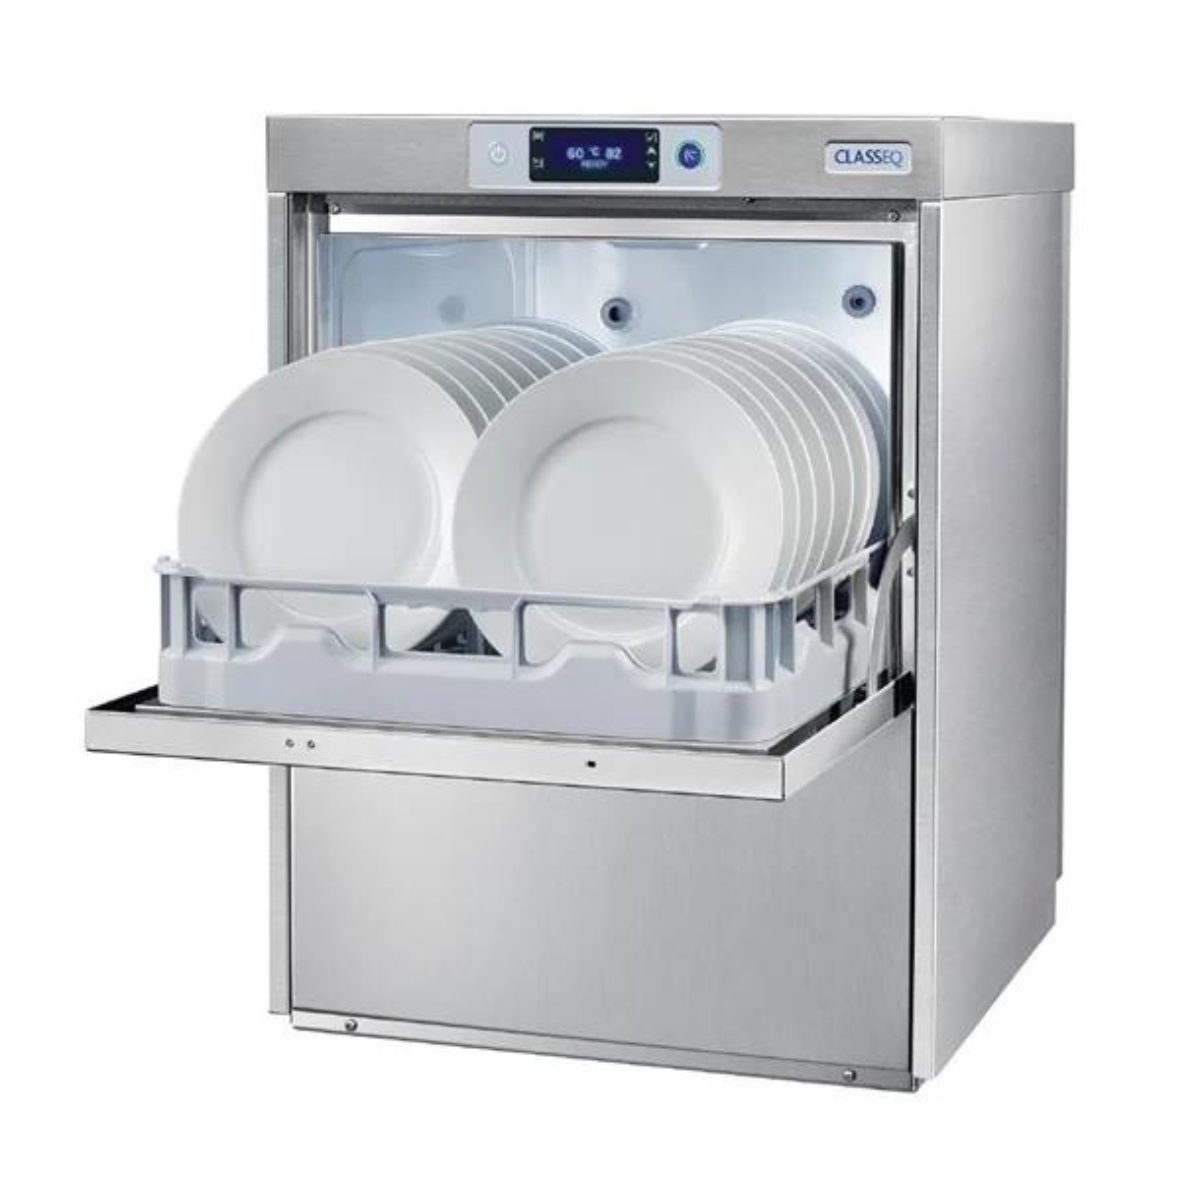 Classeq Undercounter Dishwasher C400WS with Integrated Water Softener 400mm basket up to 40 racks/hr Drain pump & water softener